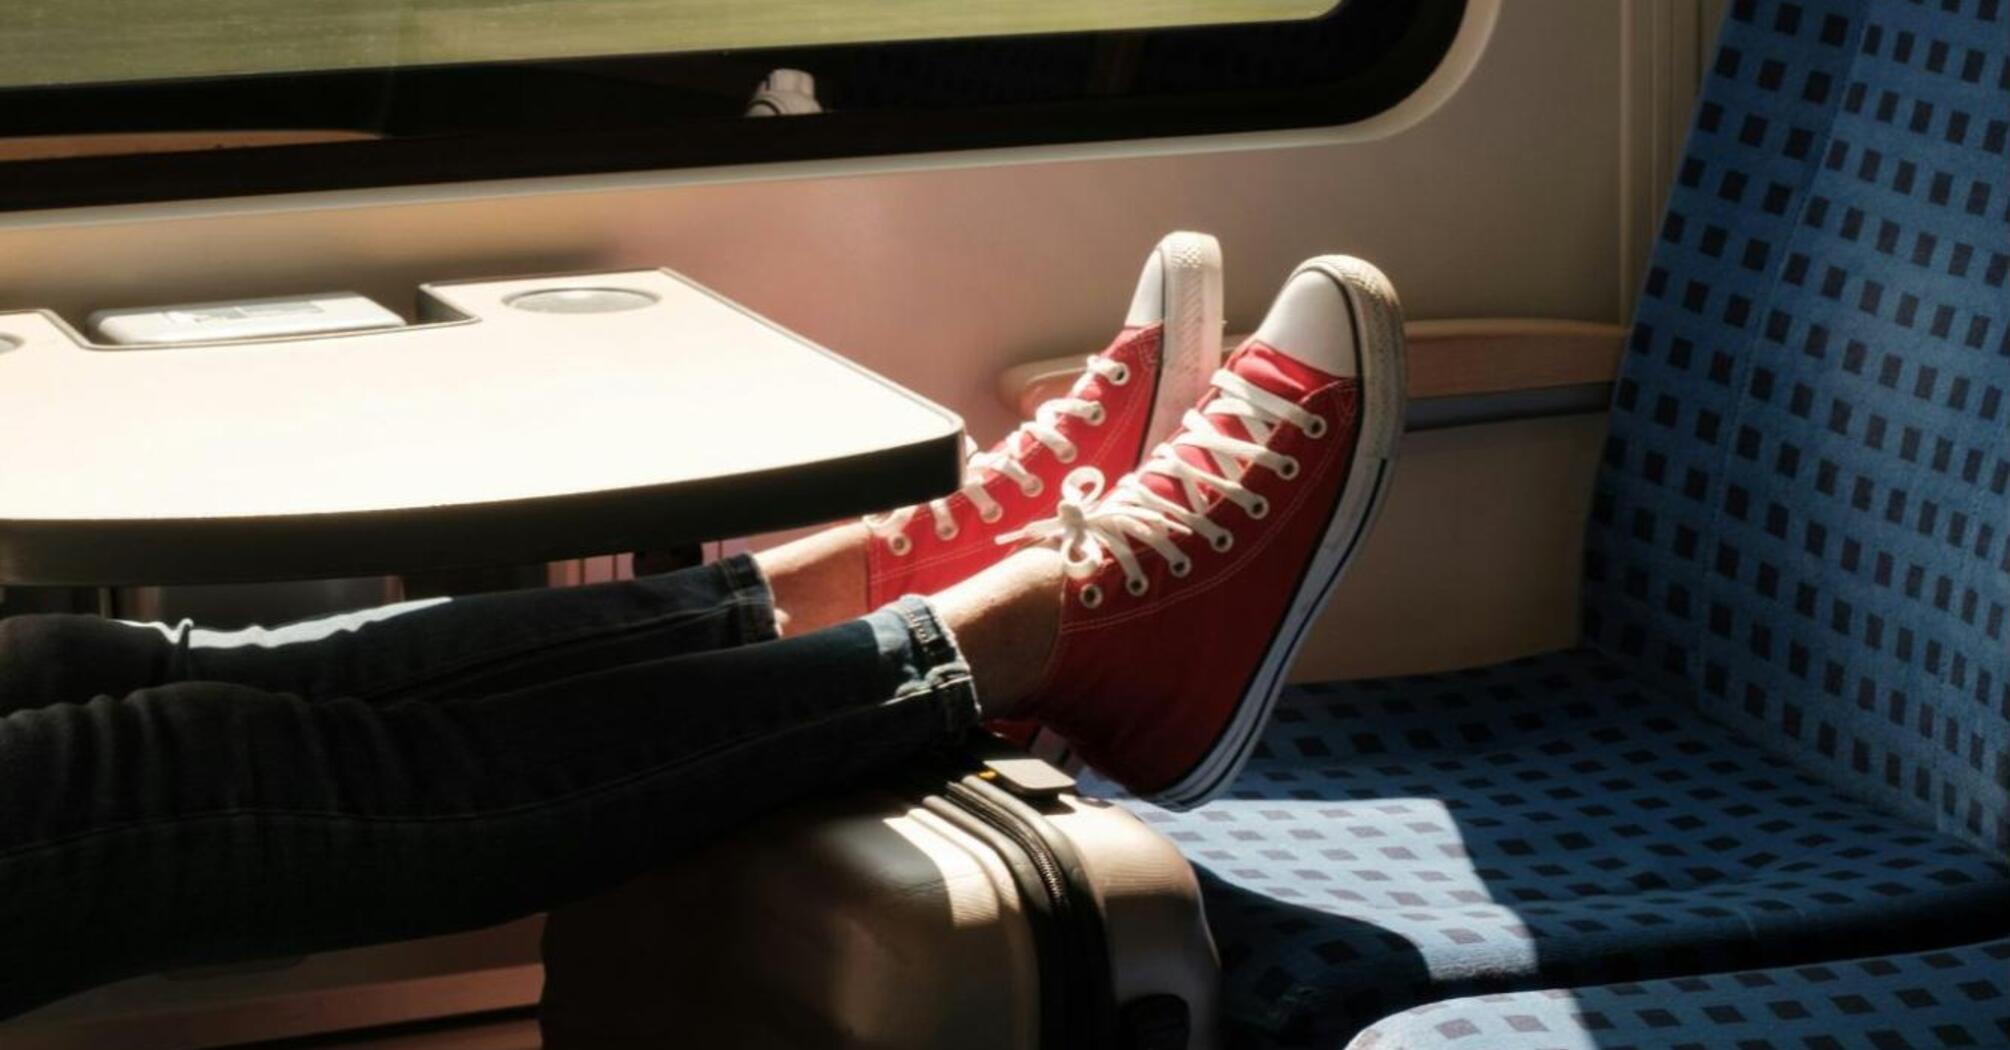 A person wearing red sneakers relaxes on a train, with their feet propped up on a suitcase next to a window showing blurred scenery